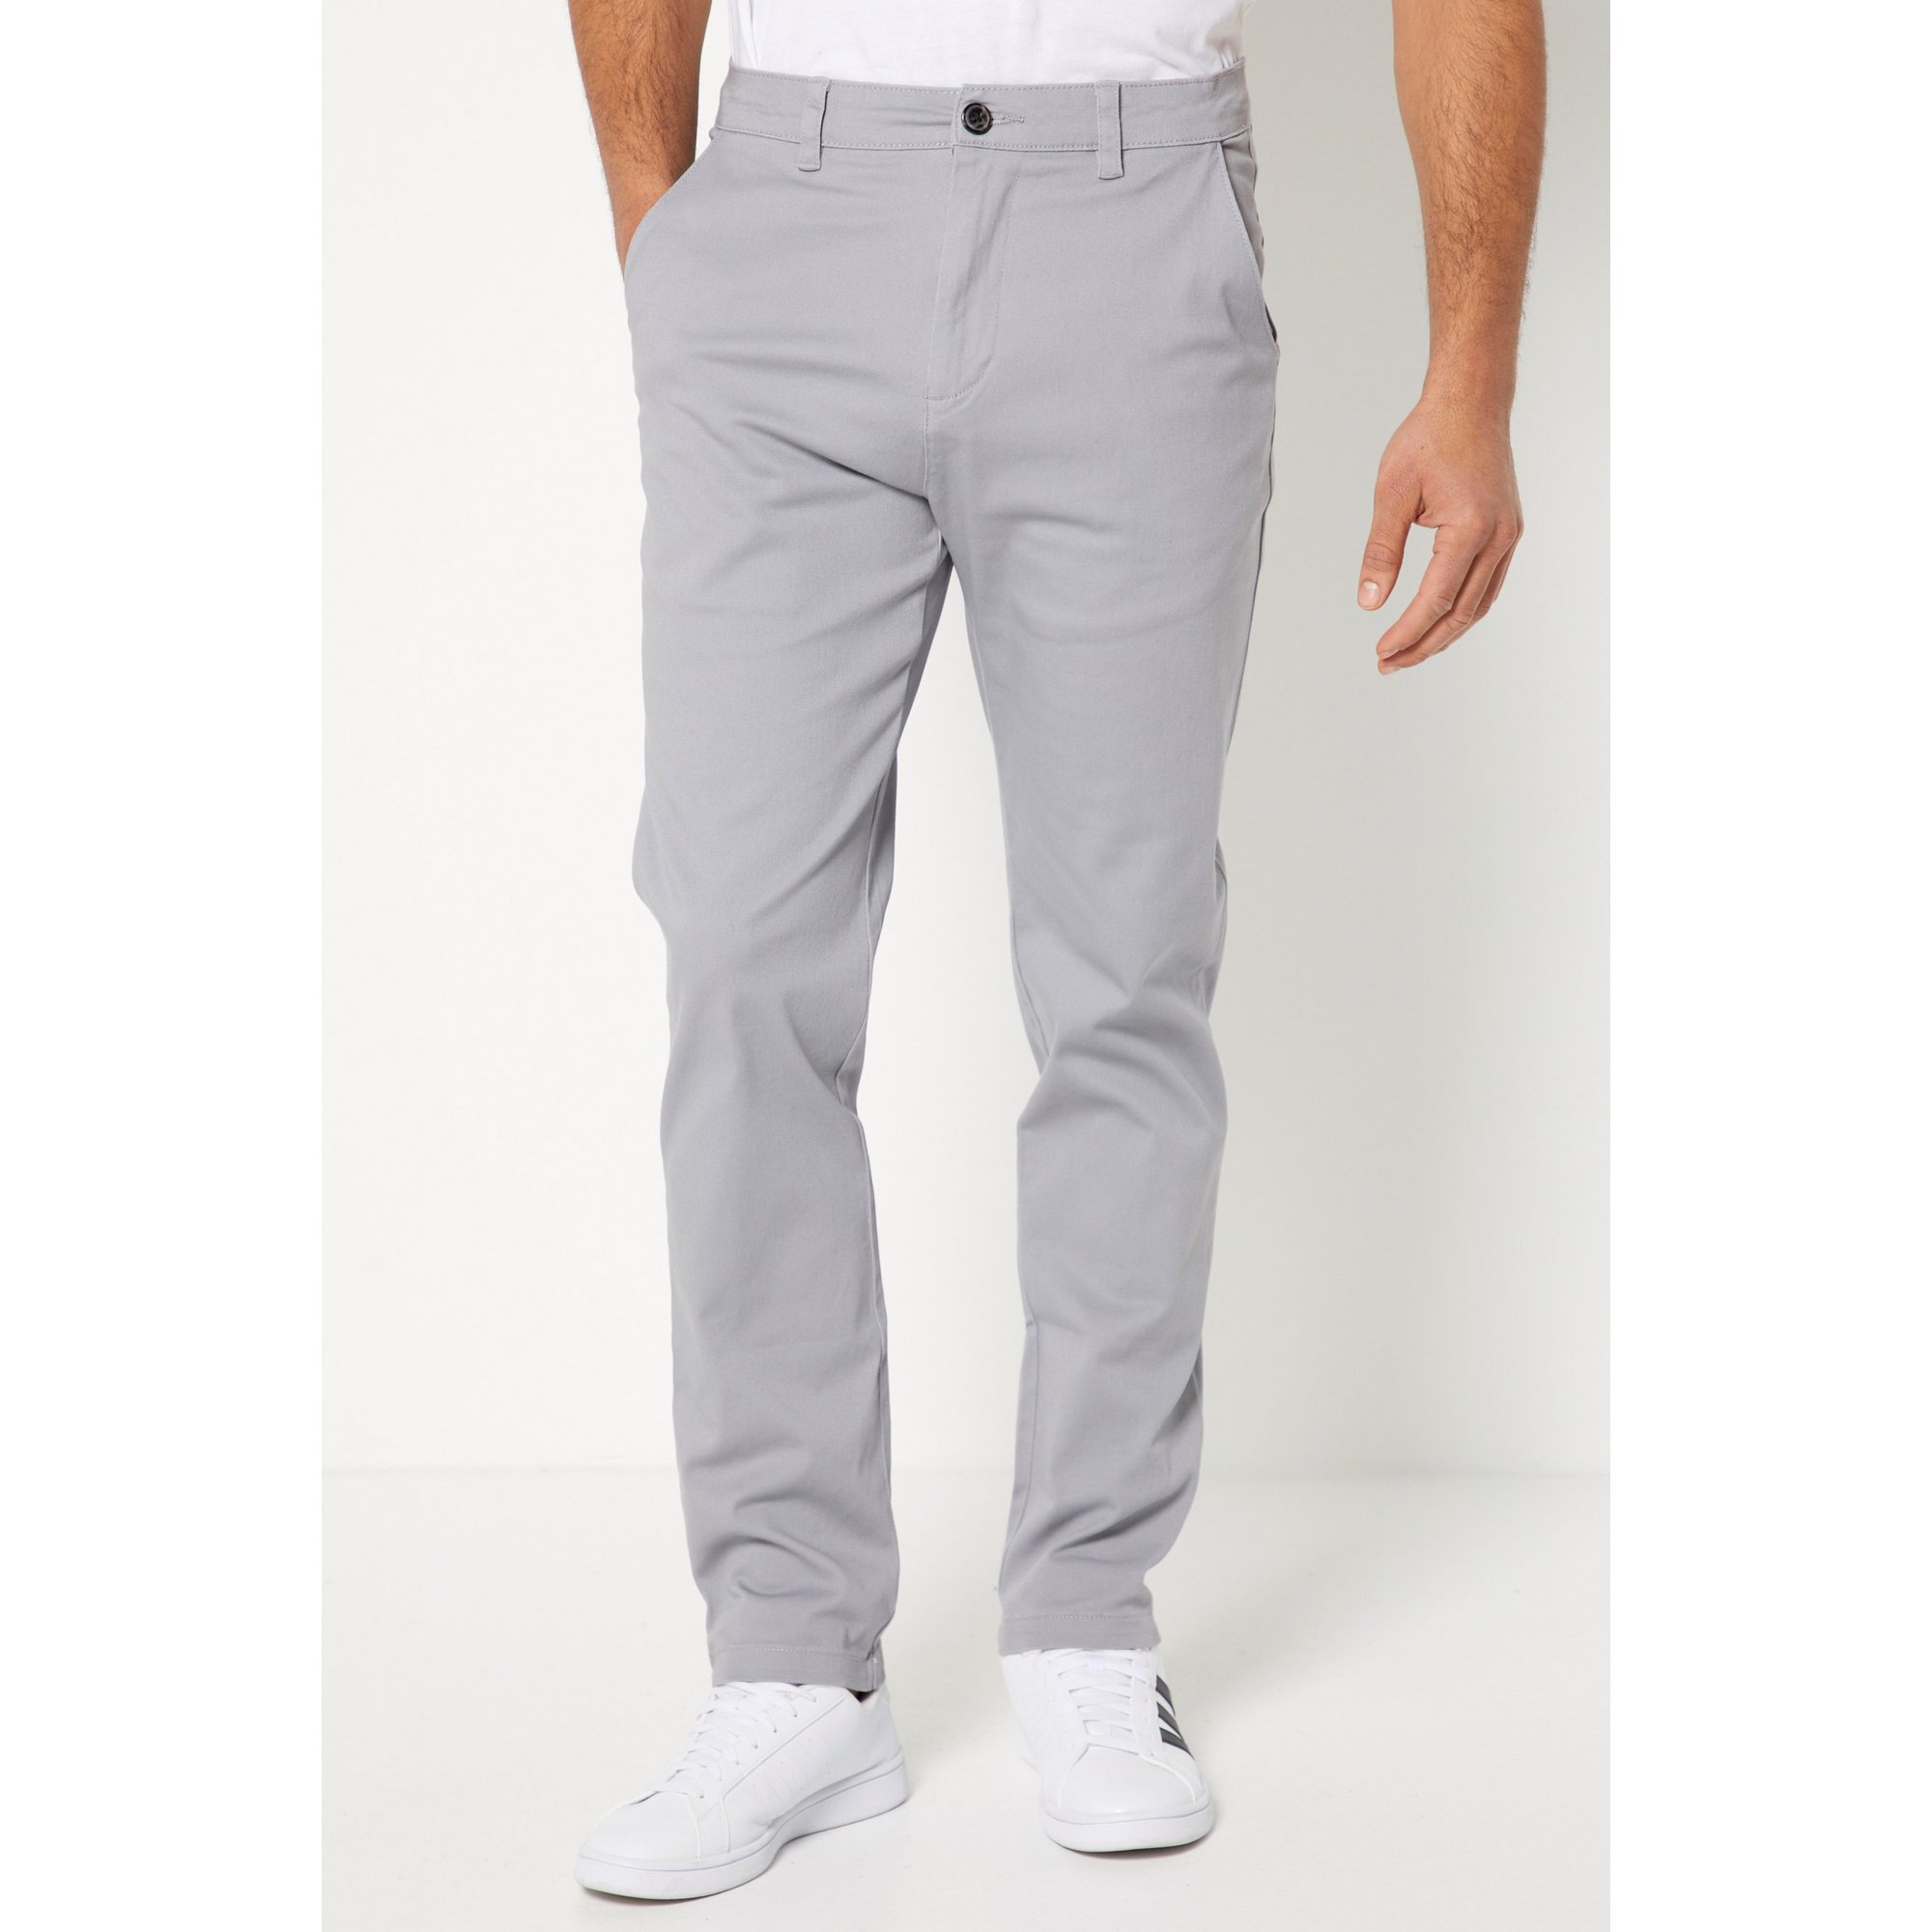 Slim Fit Grey Chino Trousers